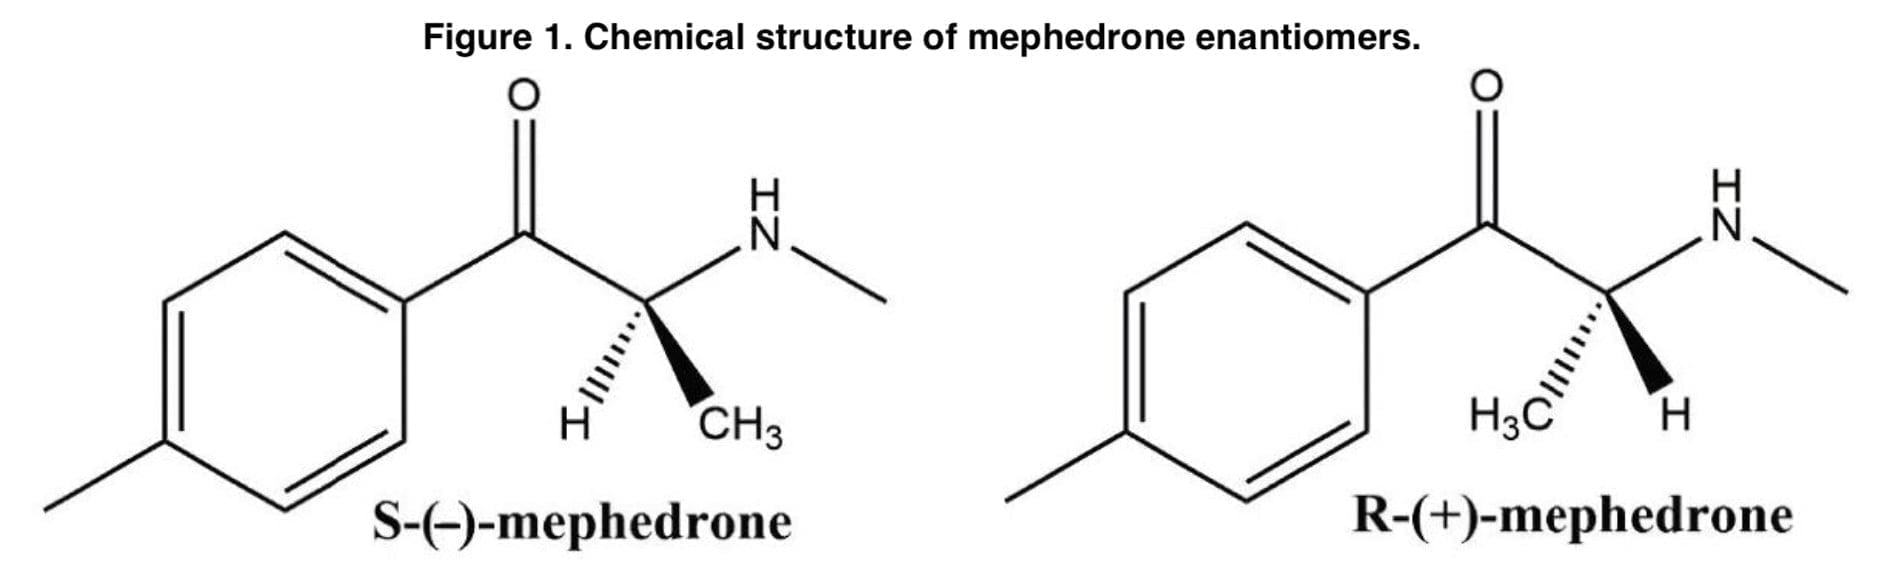 <strong>Pharmacokinetics of mephedrone during intranasal use</strong>